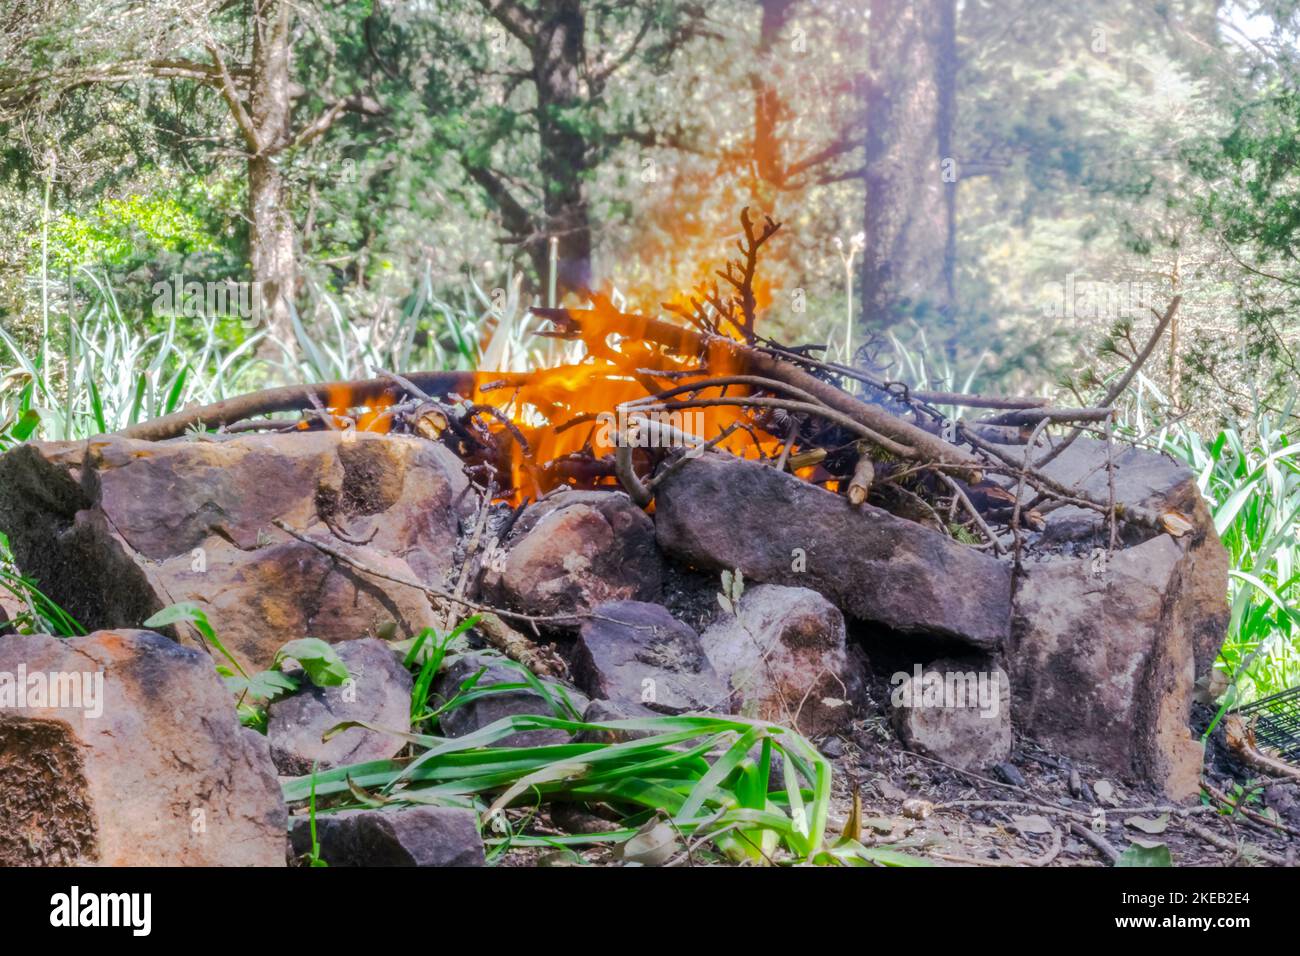 Natural barbecue with stones and branches fire.Selective focus on foreground with green grass and blurred background forest trees daylight. Stock Photo